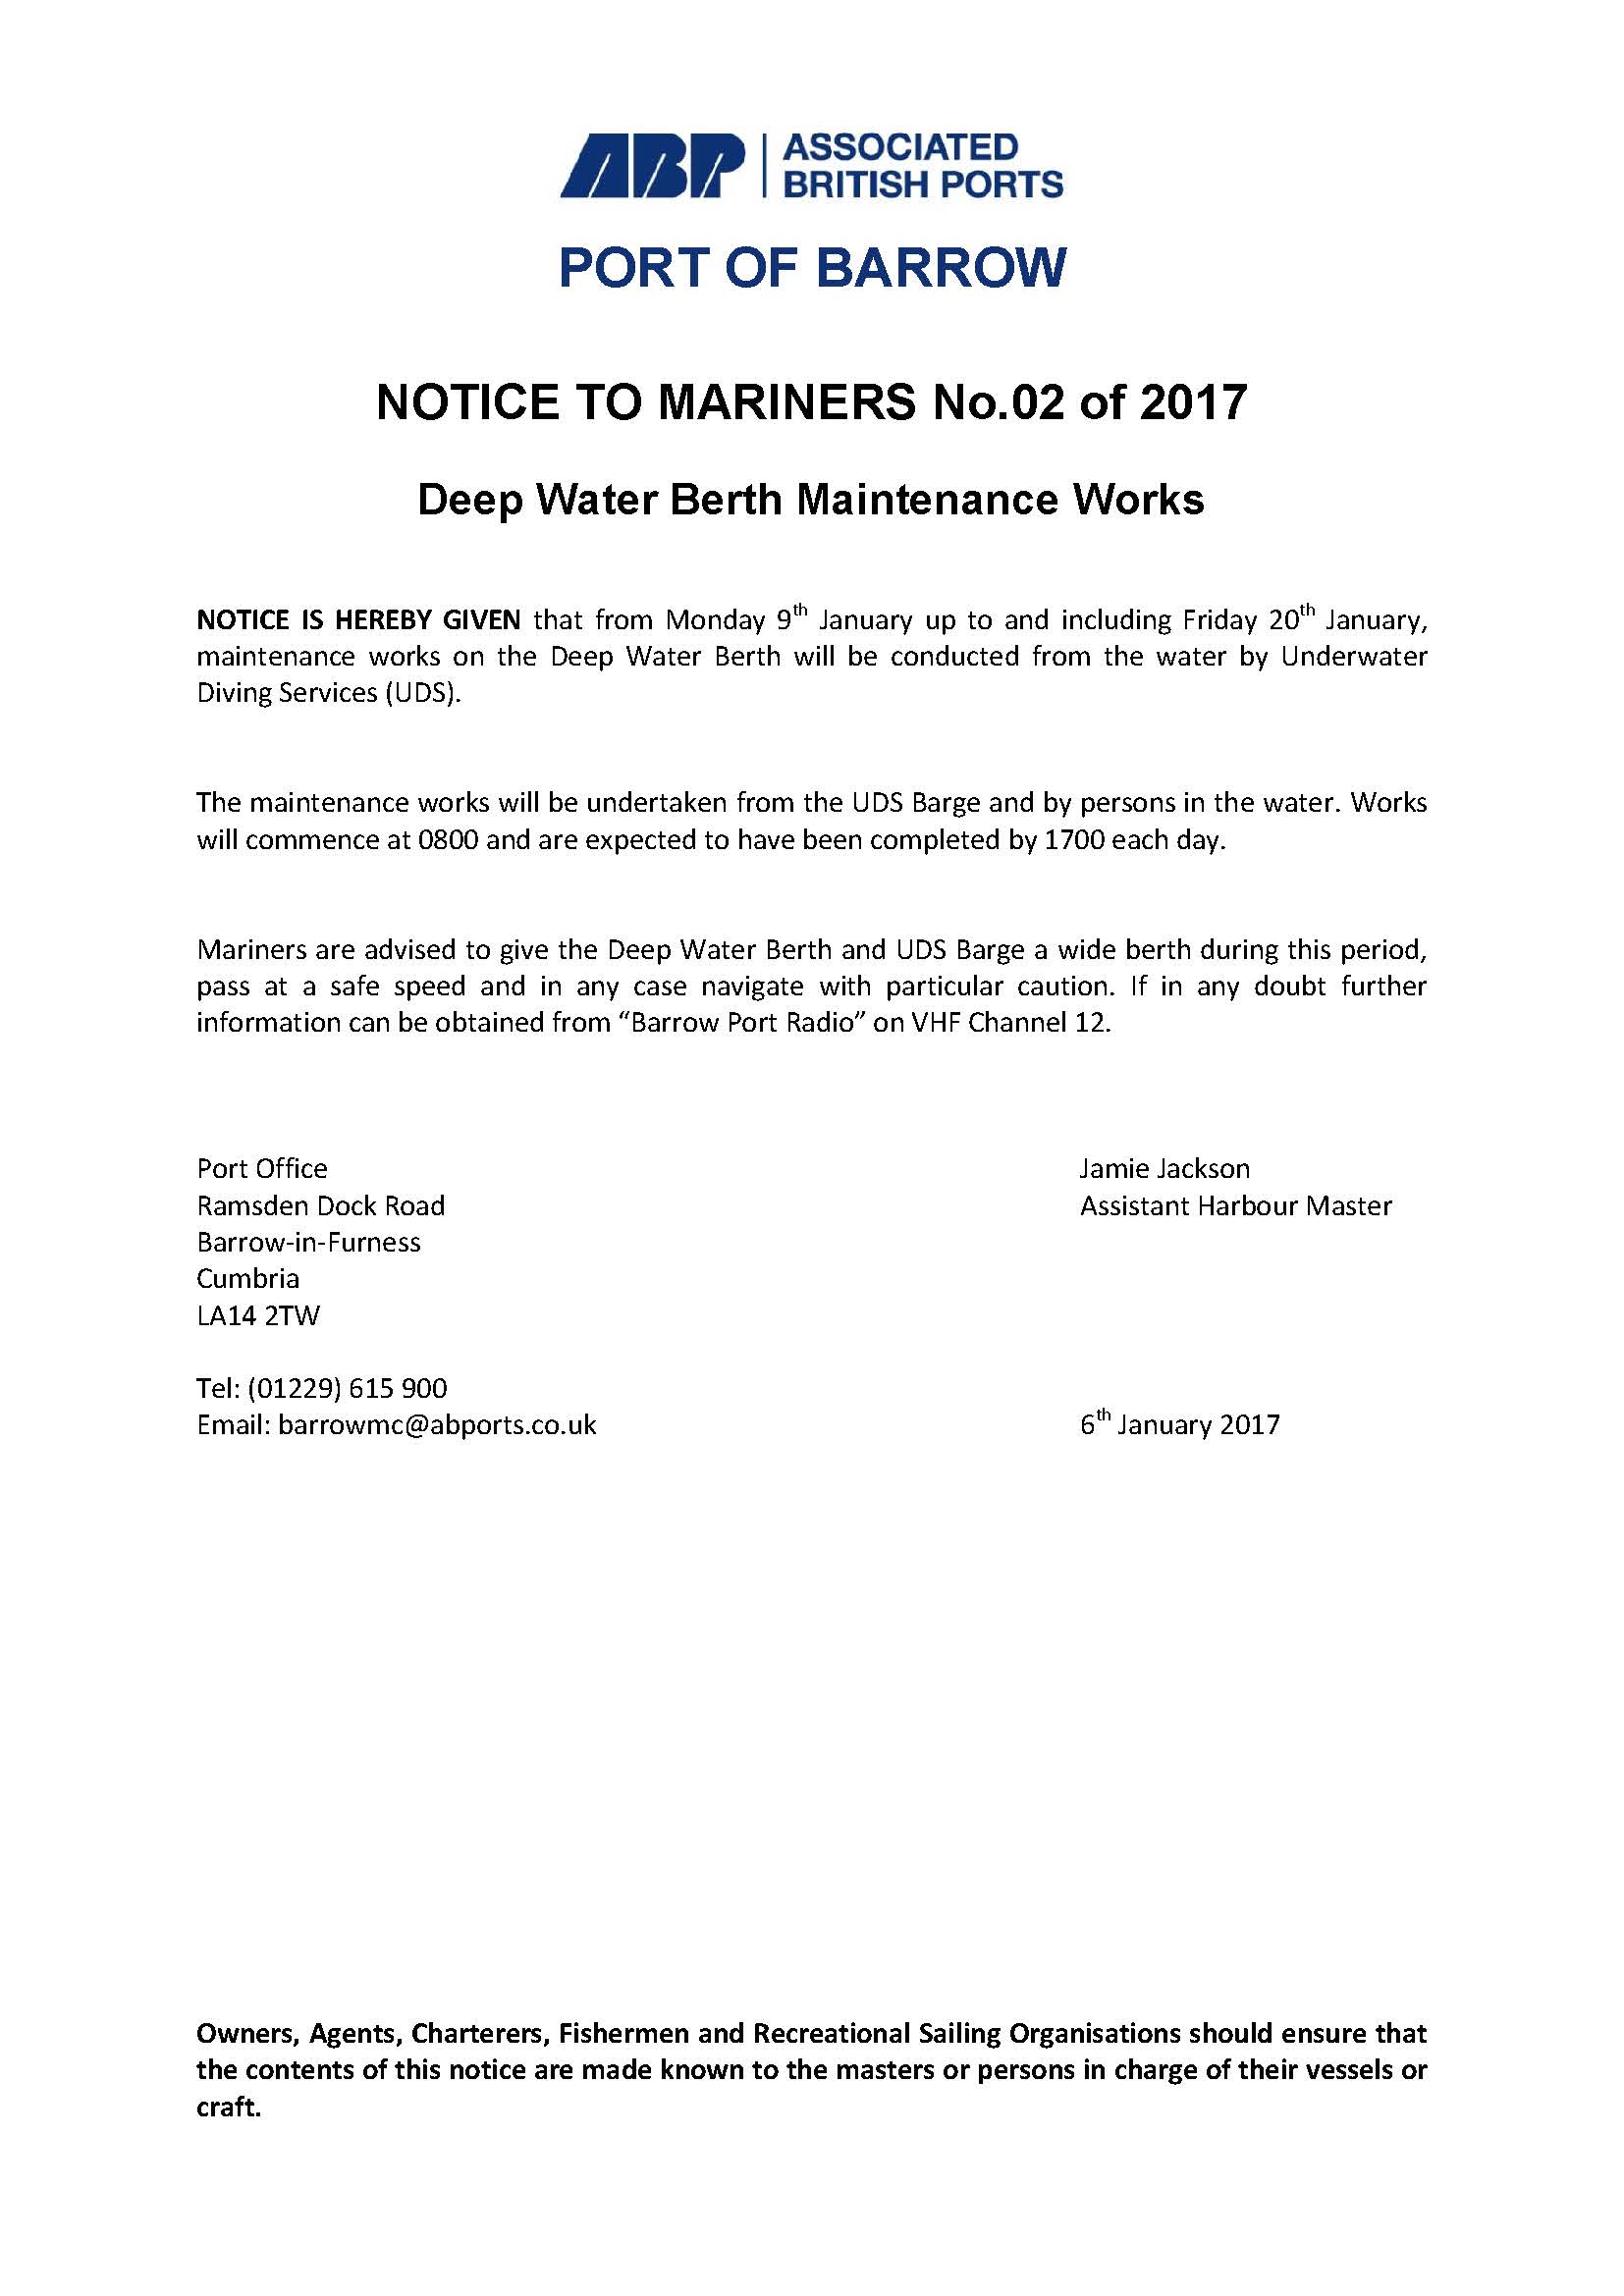 Notice to Mariners 2